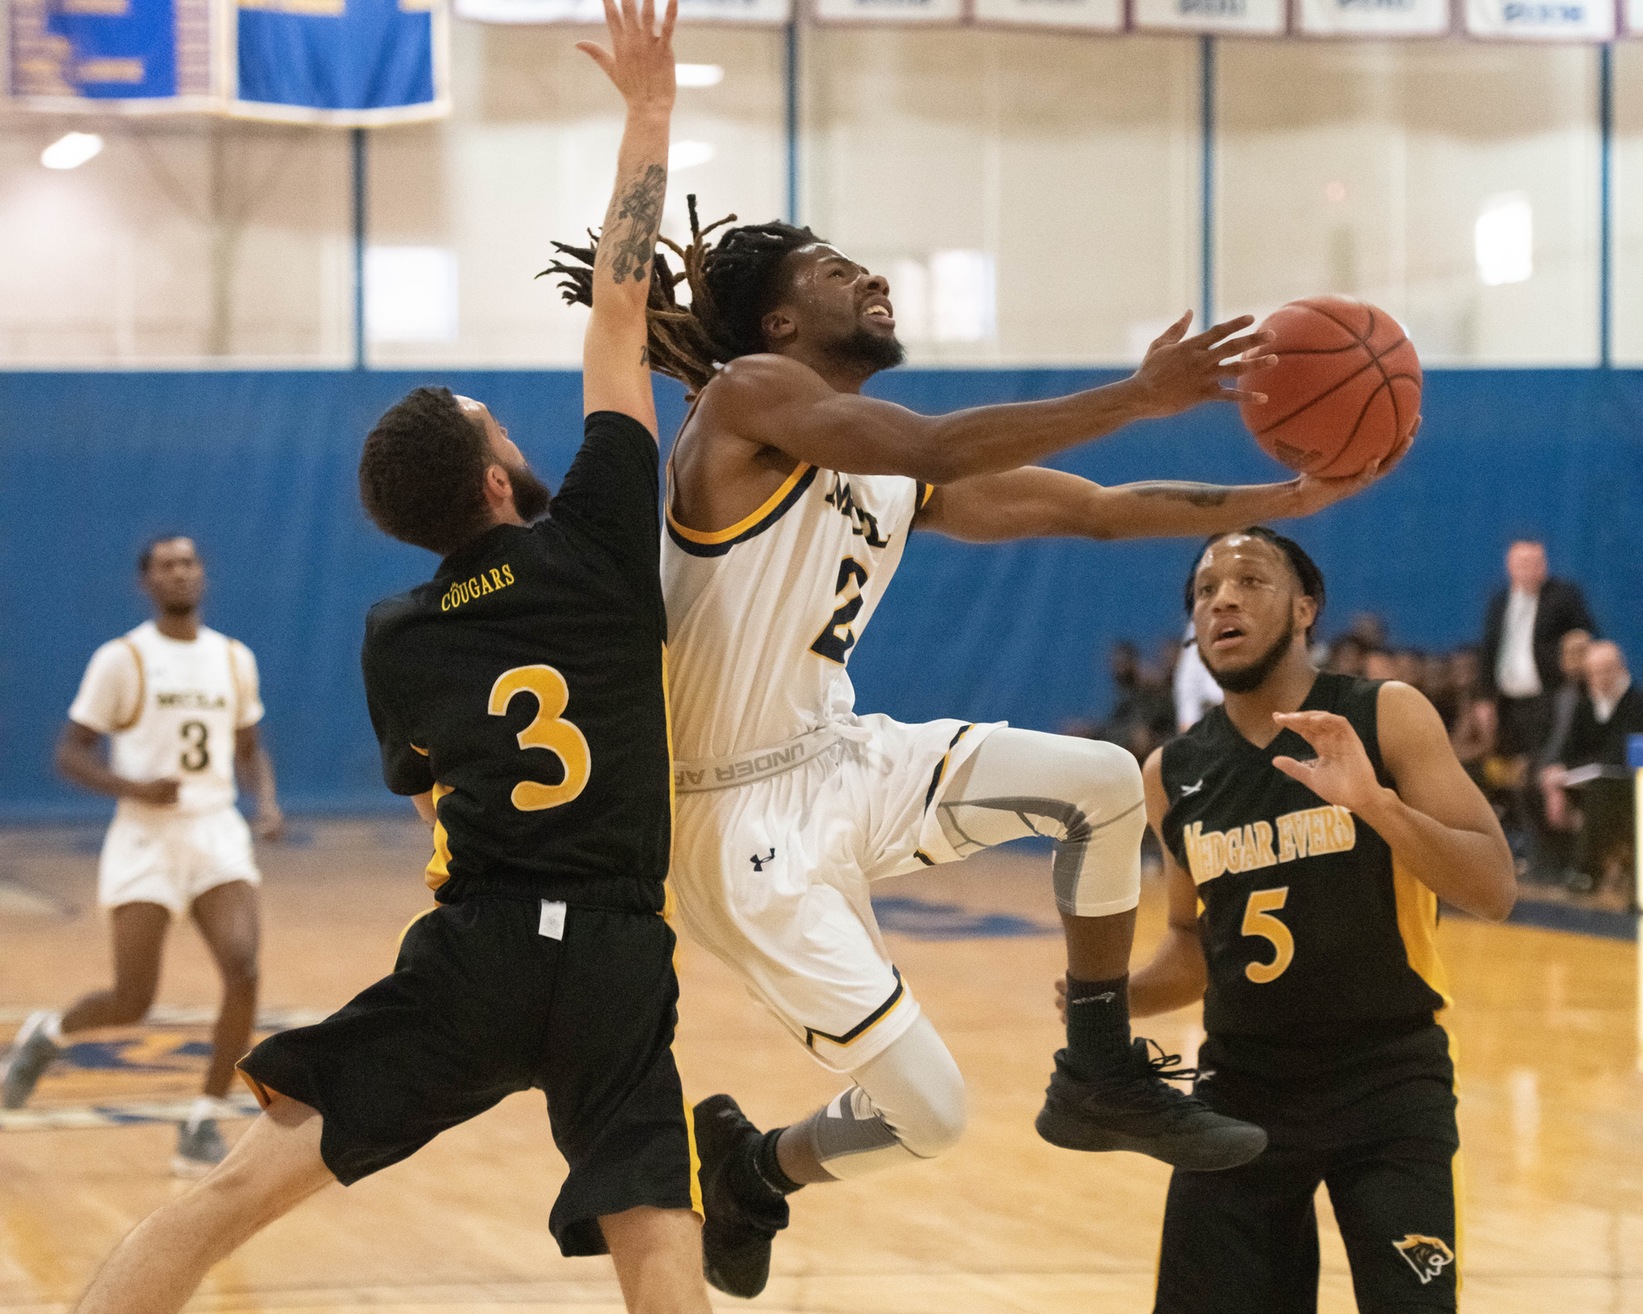 Men's Basketball tripped up on road at Salem 88-67